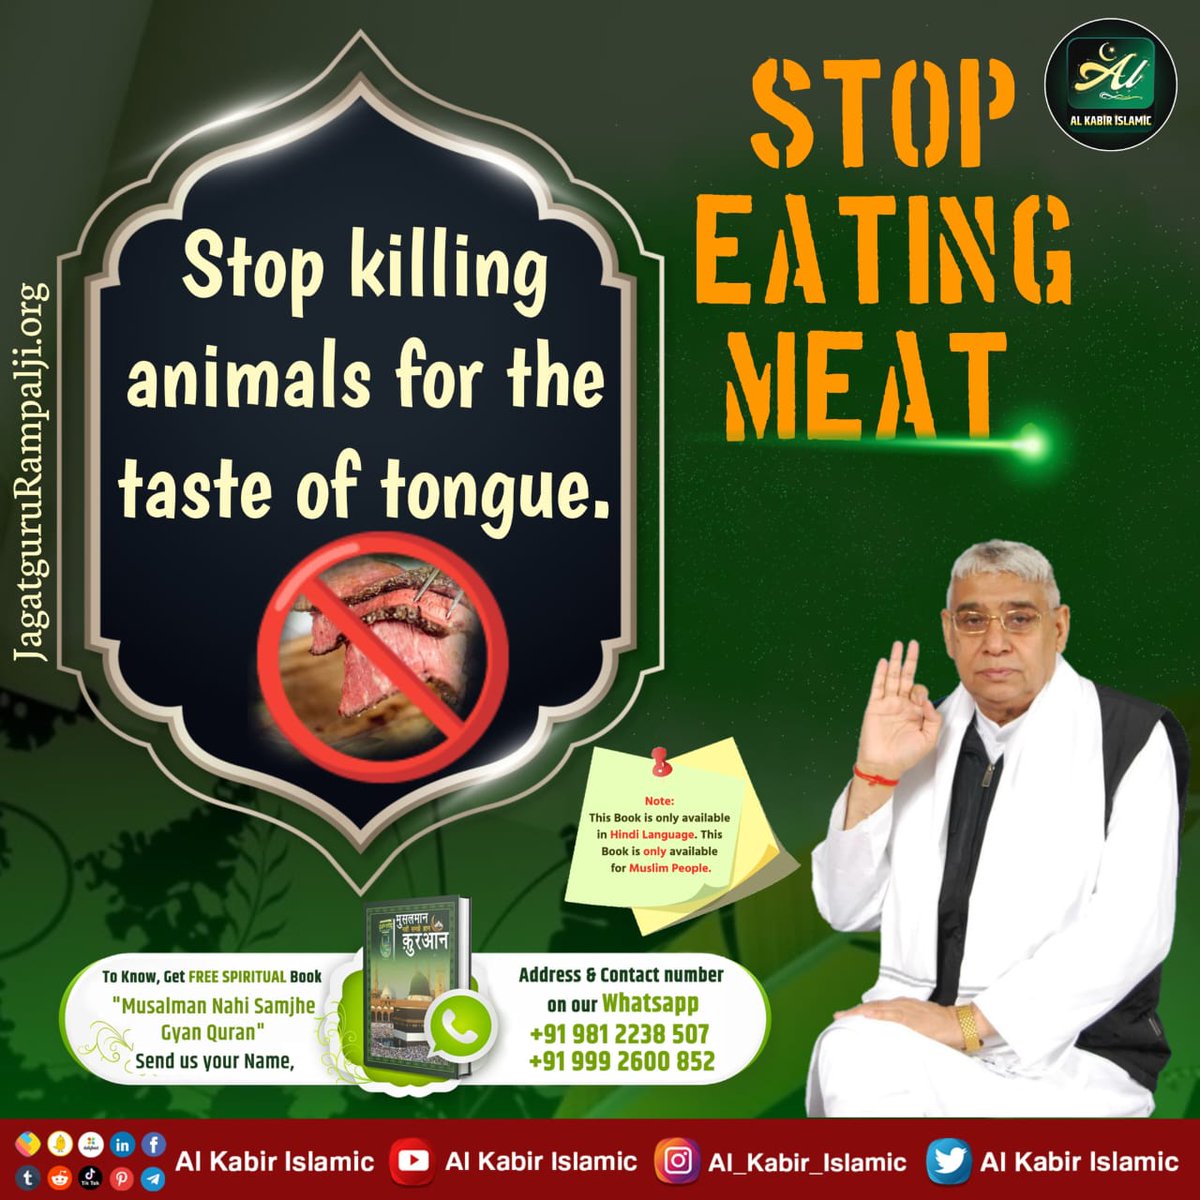 Stop killing animals for the taste of tongue.
#GodMorningThursday
👉More know must read the sacred book Gyan Ganga